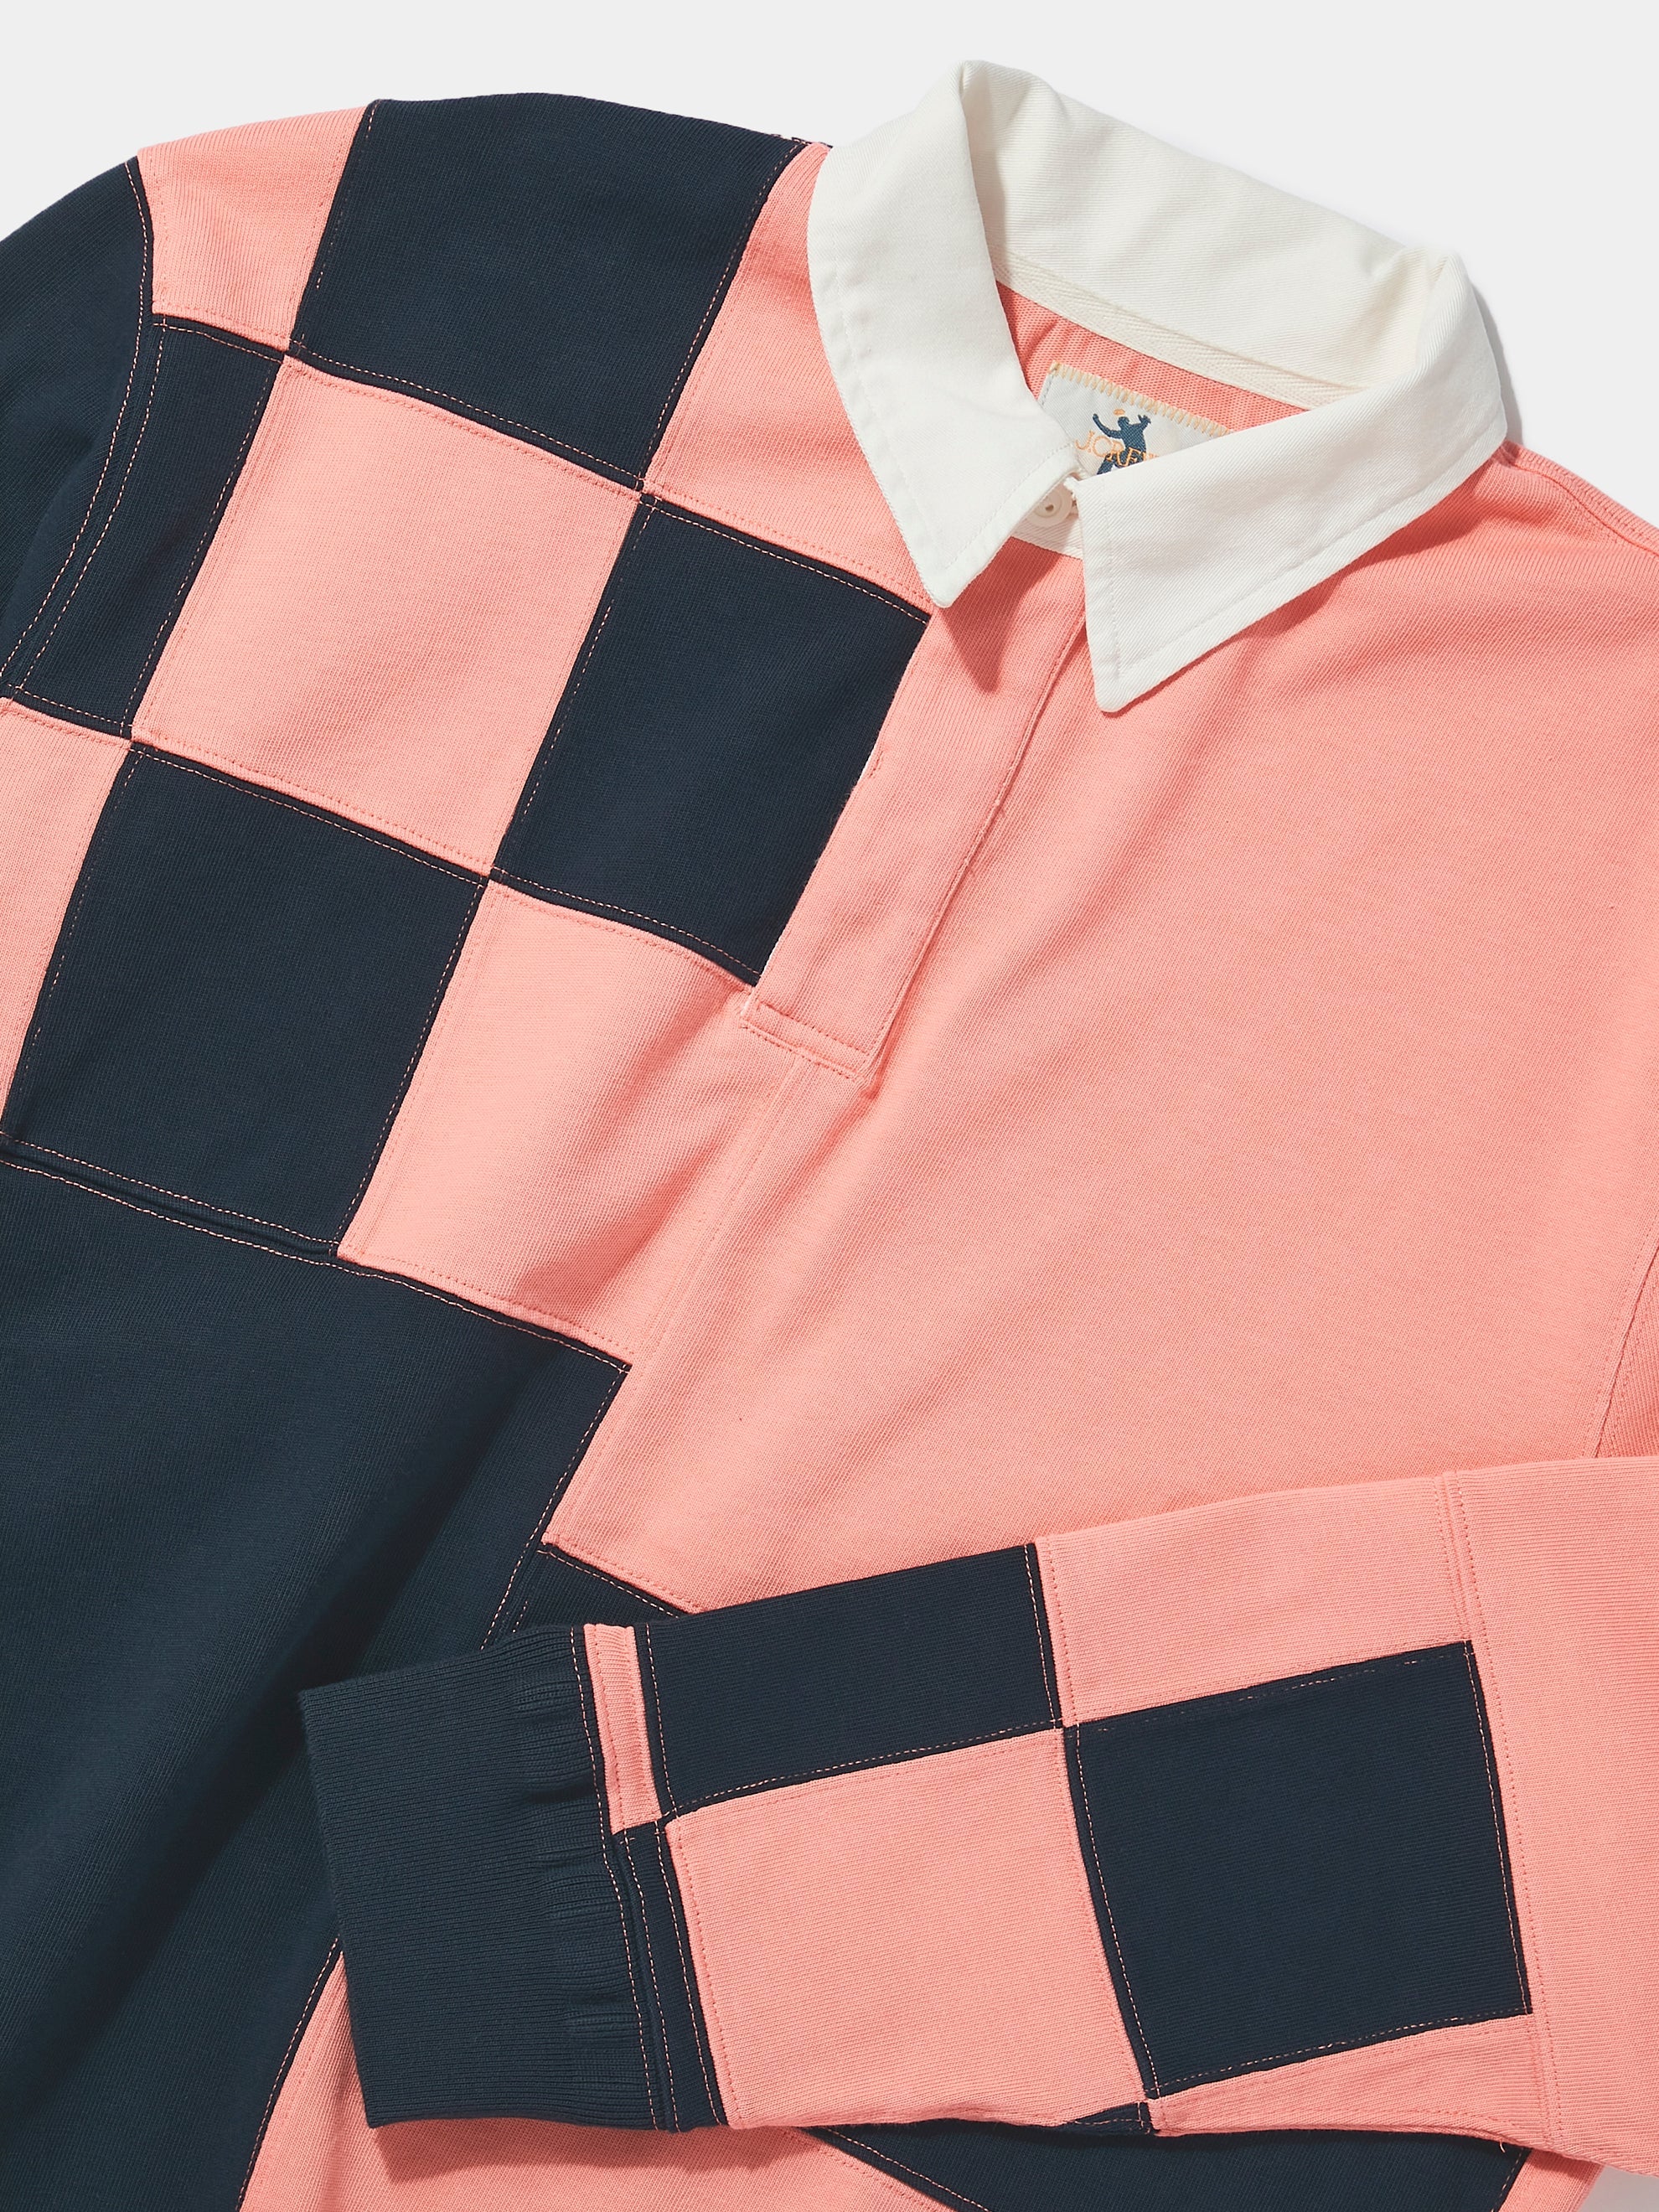 Union x J.Crew Rugby Polo Jersey